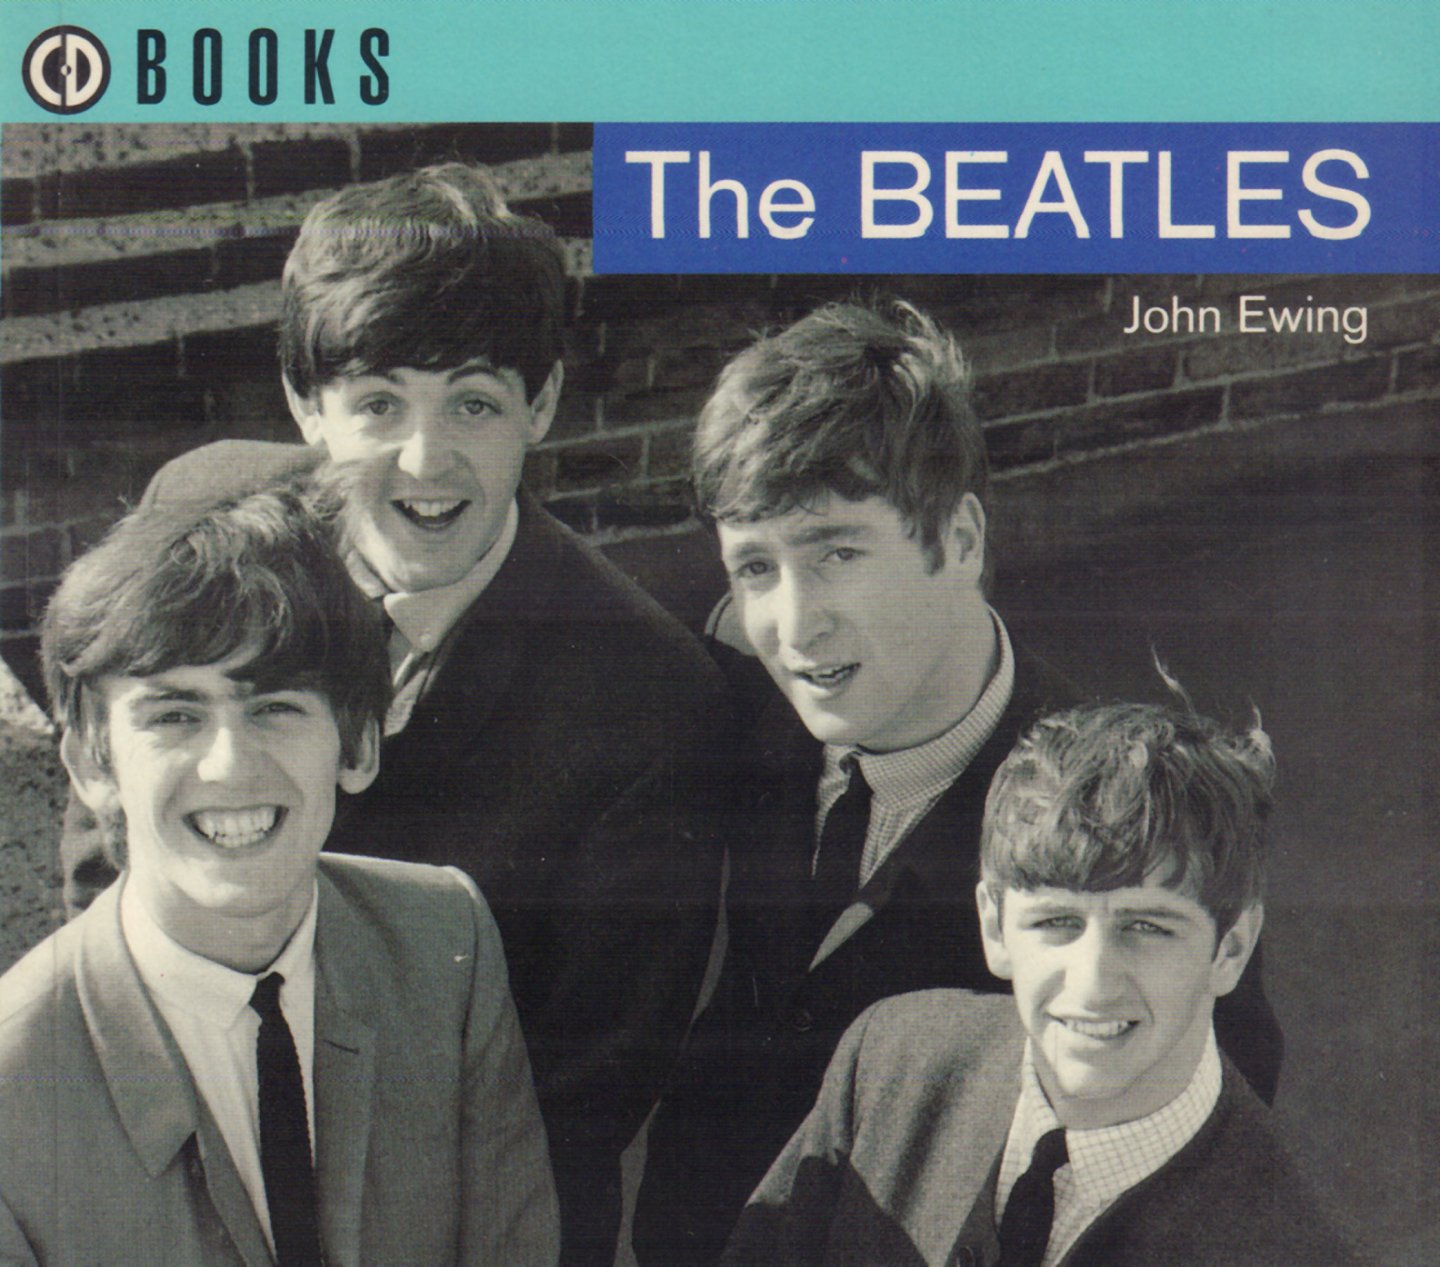 Ewing, John - The Beatles (CD Books), 120 pag. paperback, Collectable CD-size format, gave staat